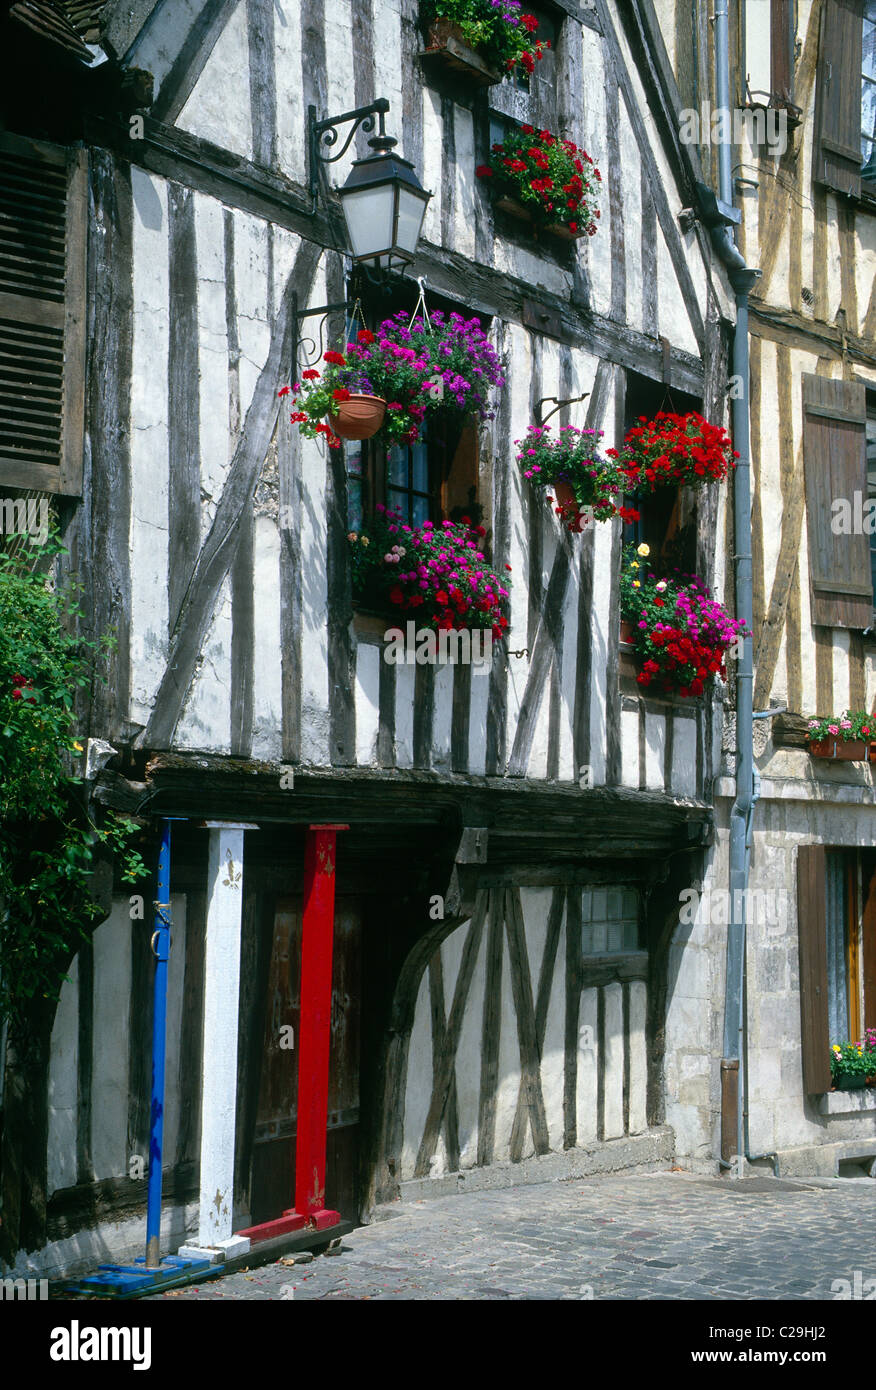 Flower boxes brighten the historic Tudor Style homes in the medieval town of Auxerre, France Stock Photo